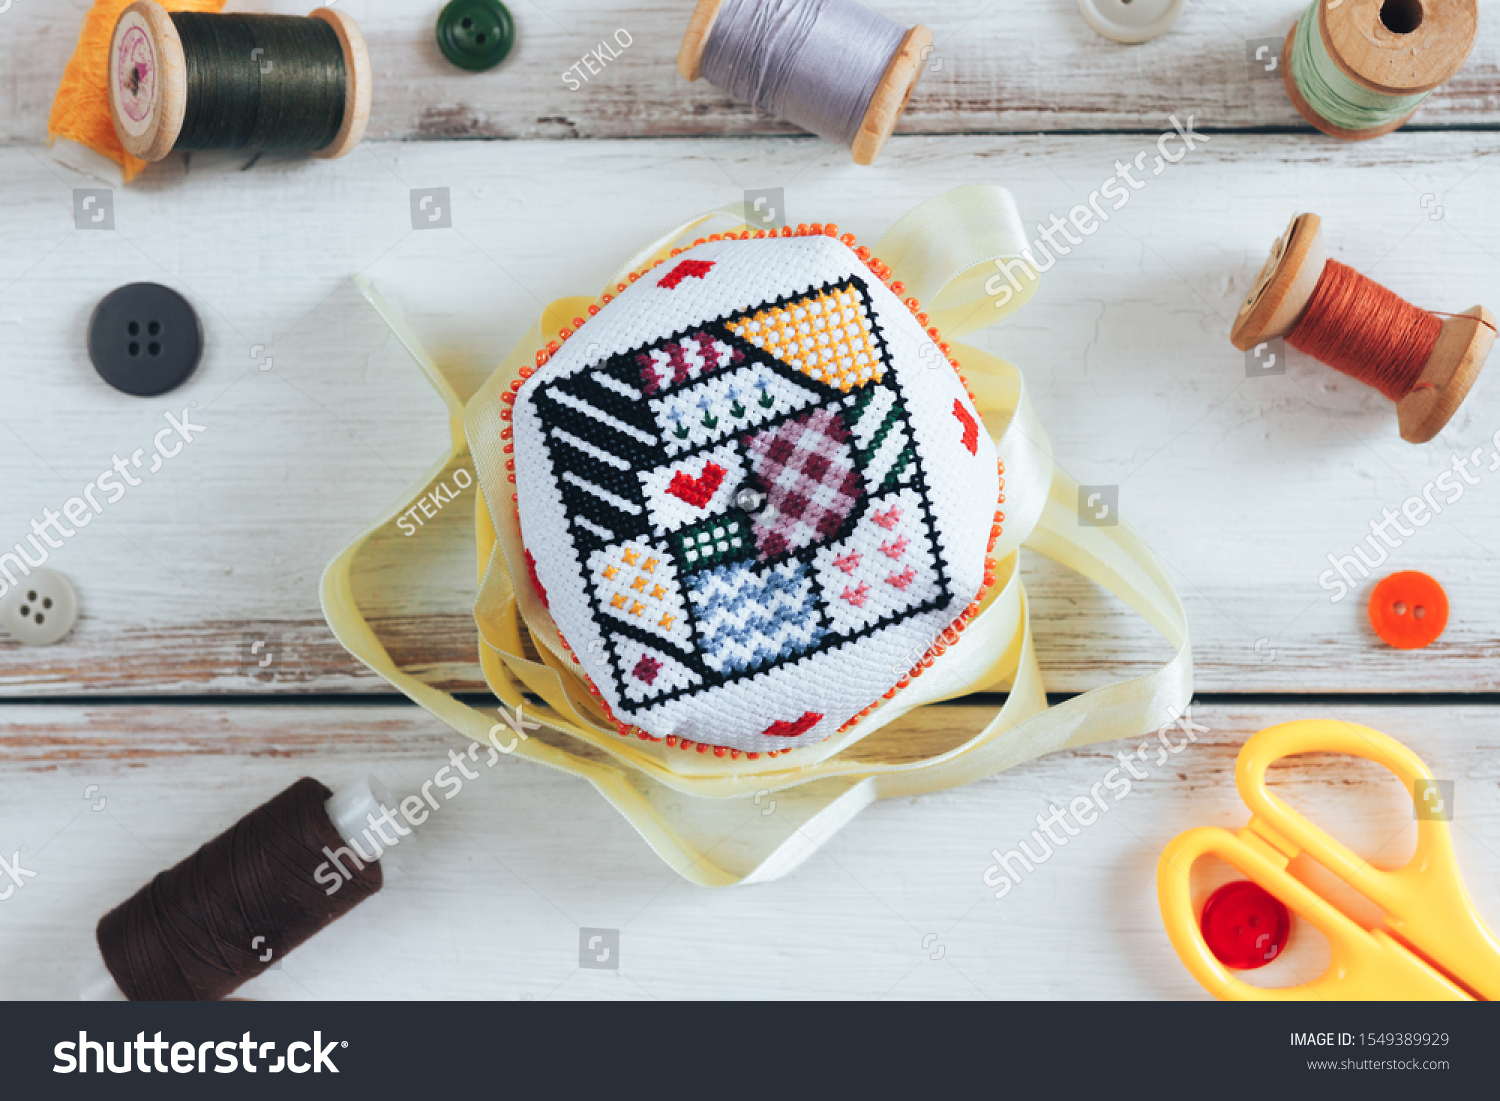 Handmade and needlework. Handmade pin cushion with a simple ornament and a pair of scissors on a white table. Sewing supplies in the background. Top view #1549389929